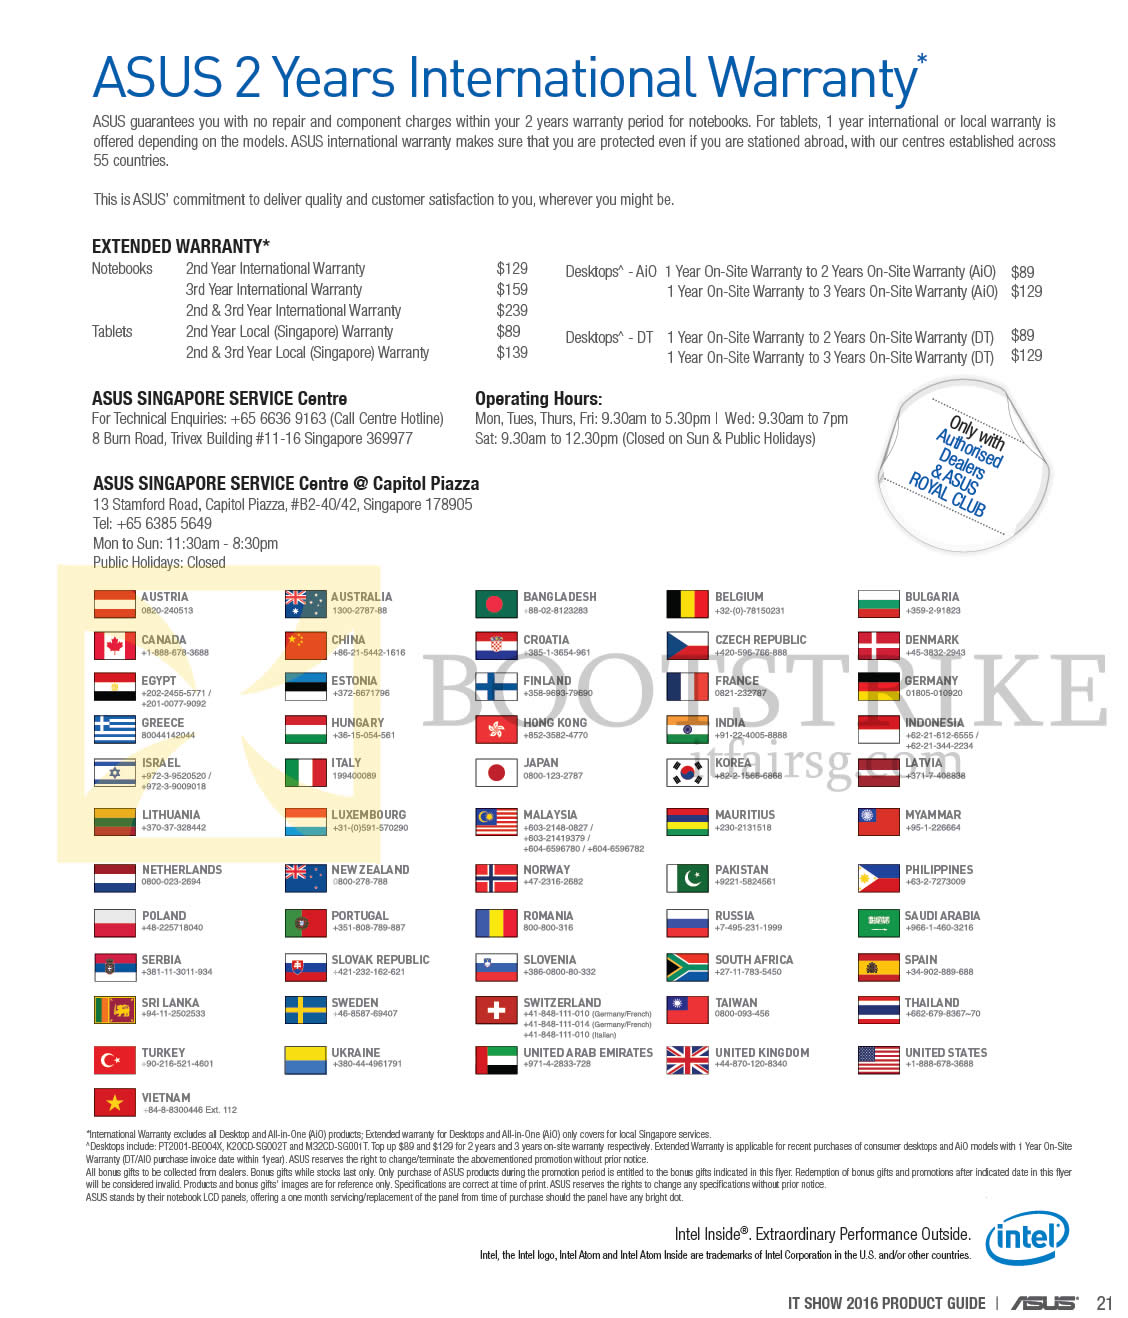 IT SHOW 2016 price list image brochure of ASUS 2 Years International Warranty Covered Countries